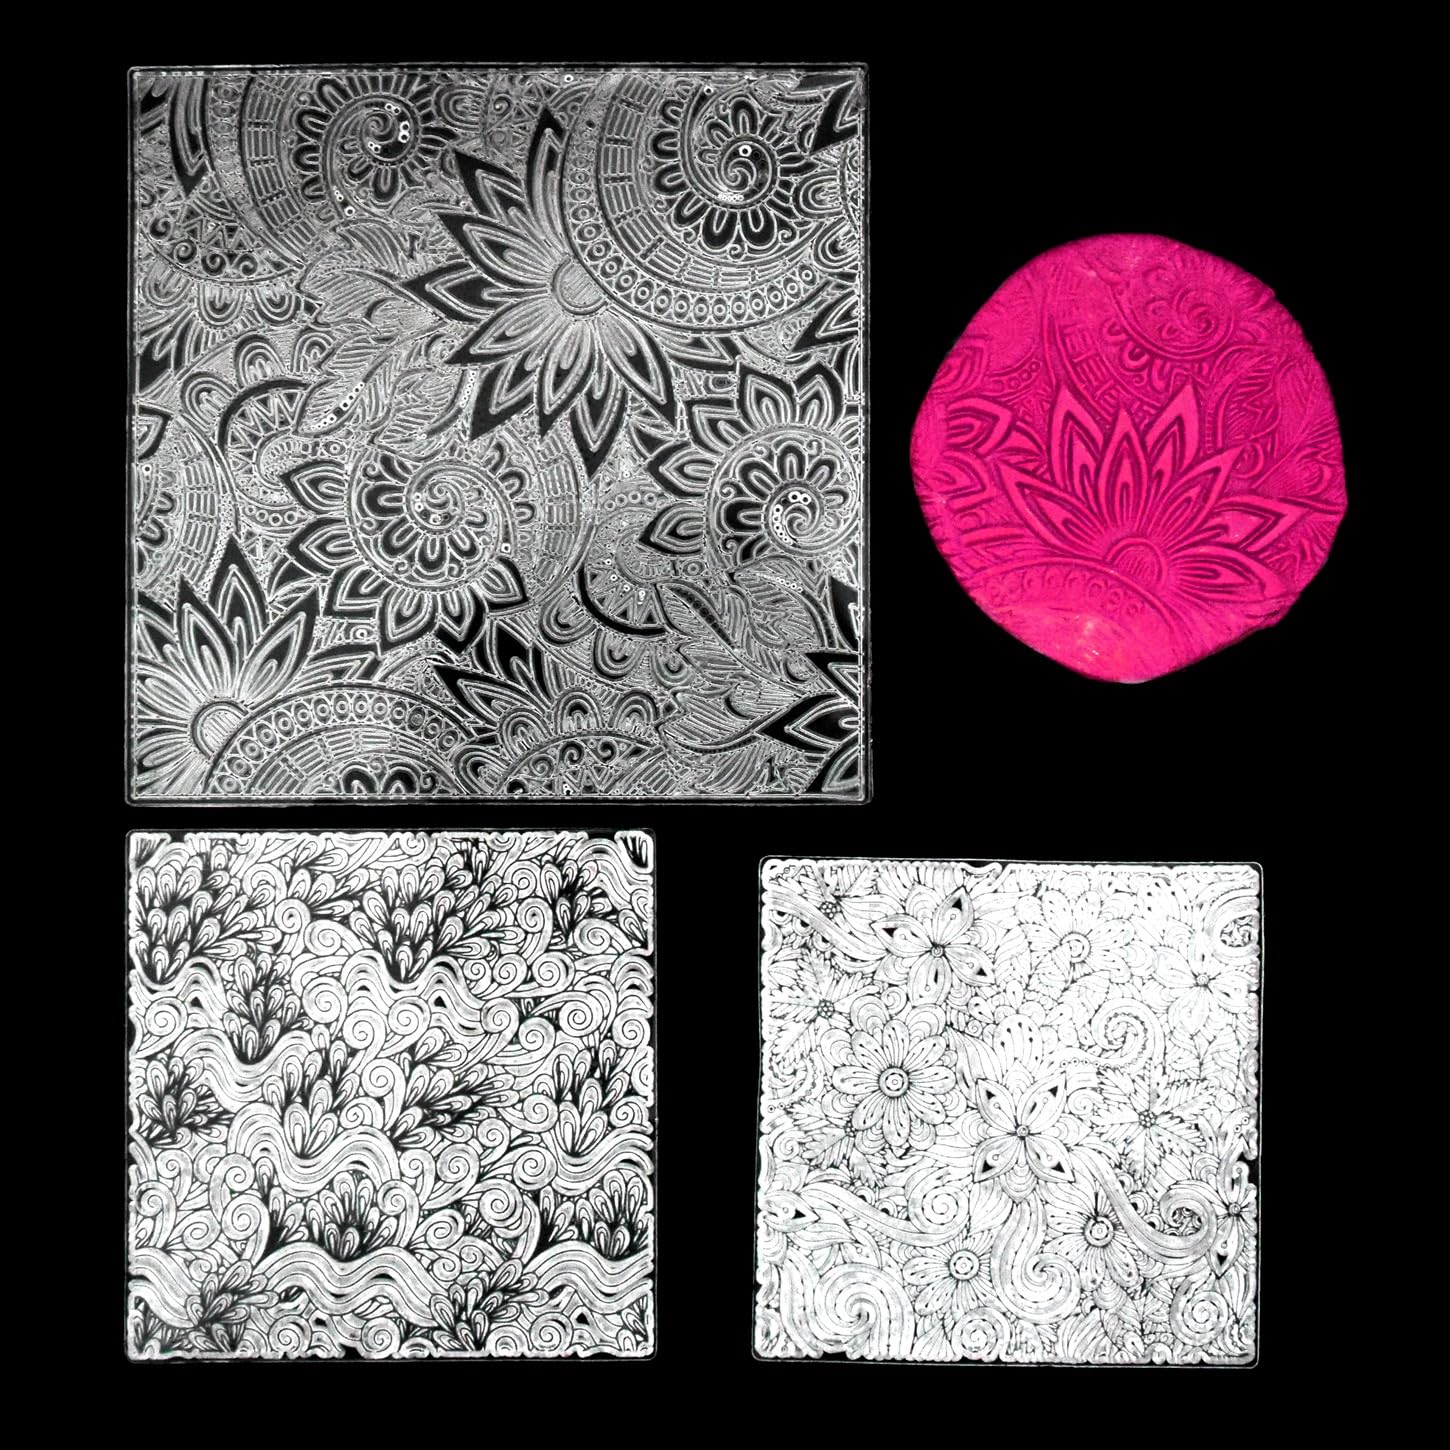 Premium Silicone Texture Stamp Sheets for Polymer Clay Jewelry and Clay Earrings - Set of 3 Floral and Unique Patterns - Easy to Use and Clean (Group 1)